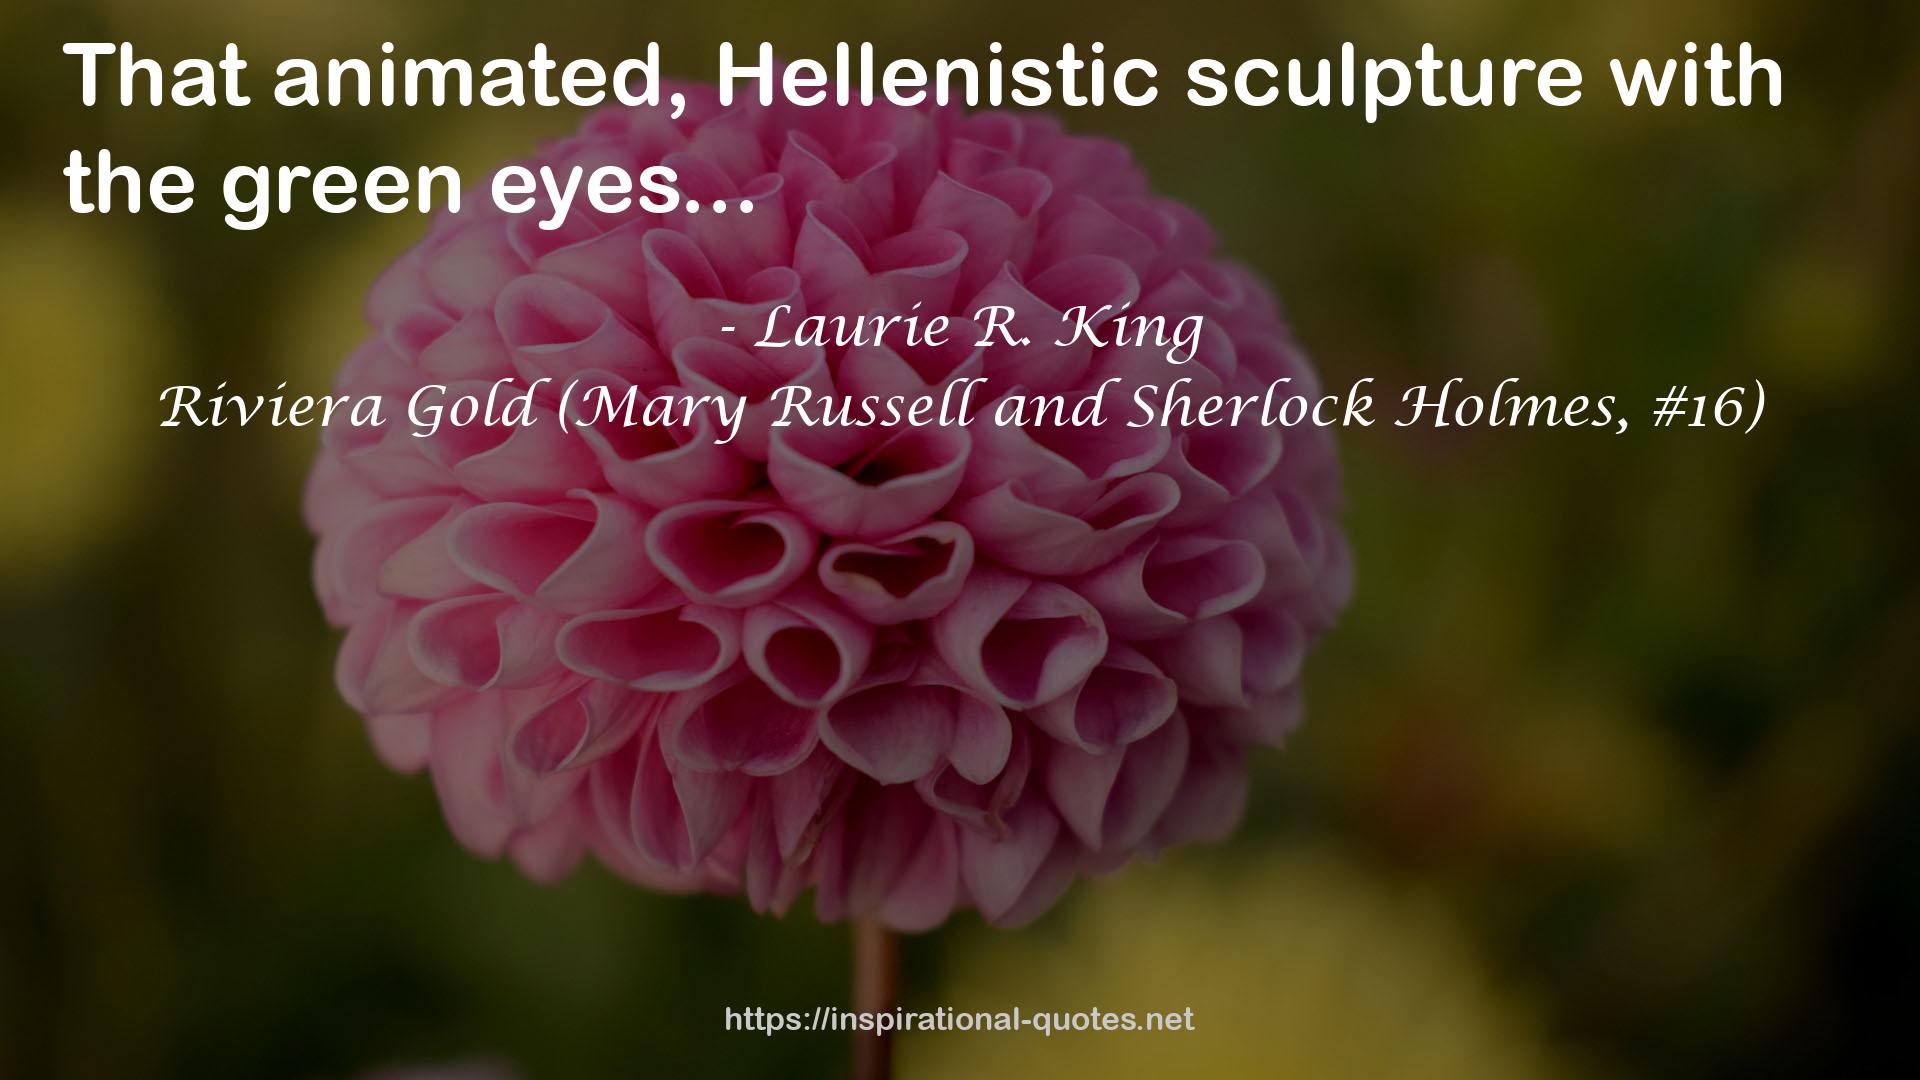 Riviera Gold (Mary Russell and Sherlock Holmes, #16) QUOTES